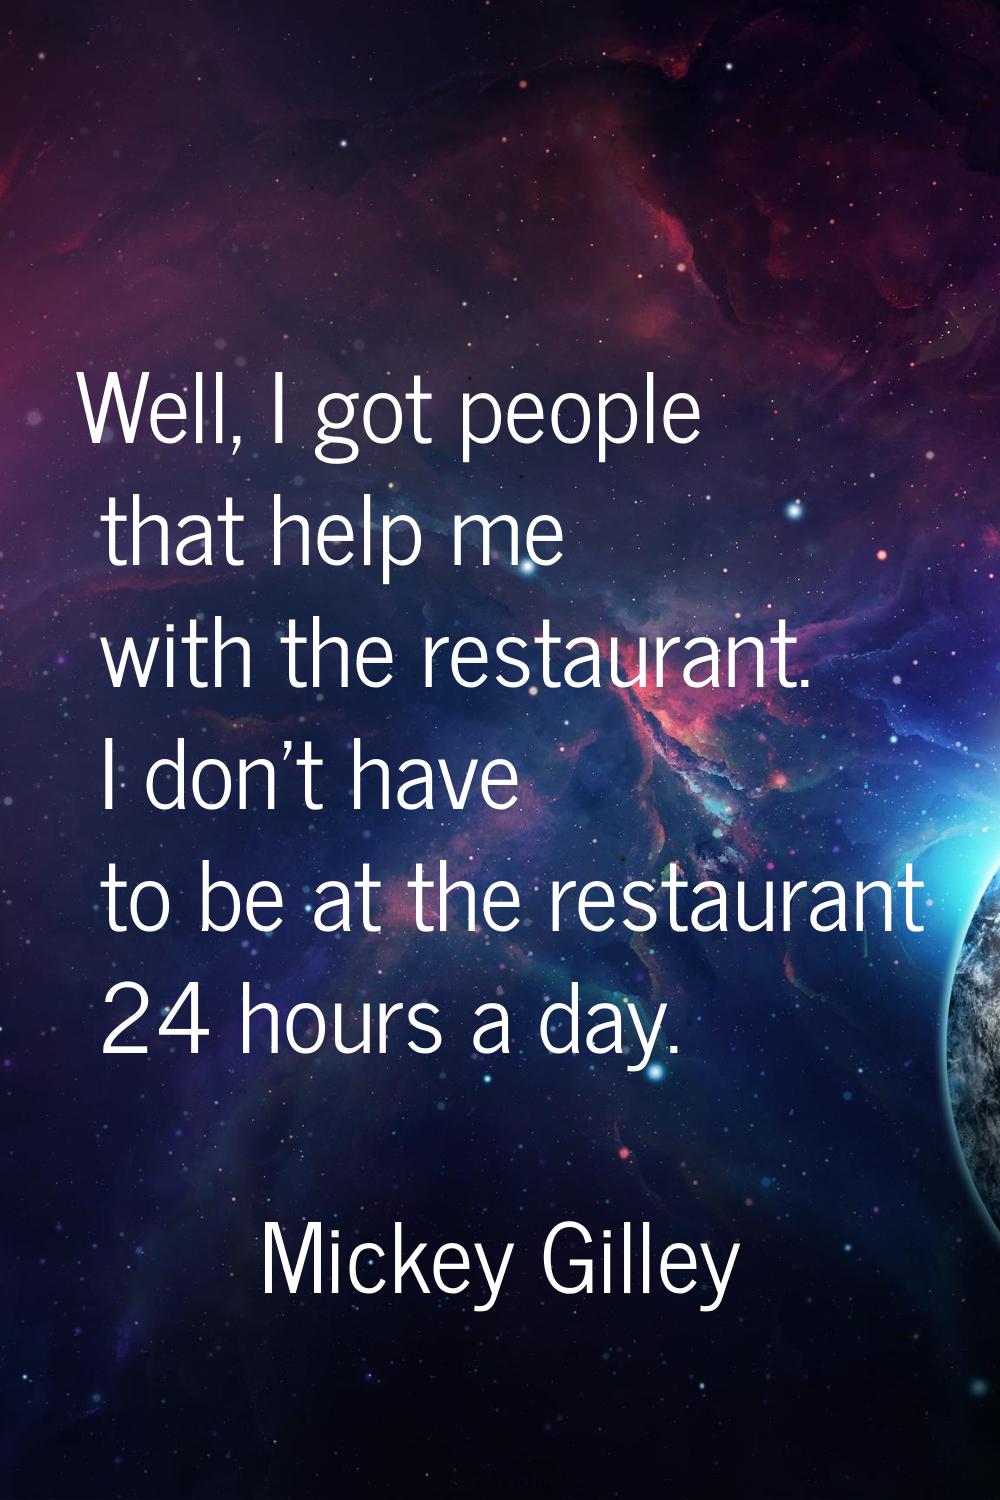 Well, I got people that help me with the restaurant. I don't have to be at the restaurant 24 hours 